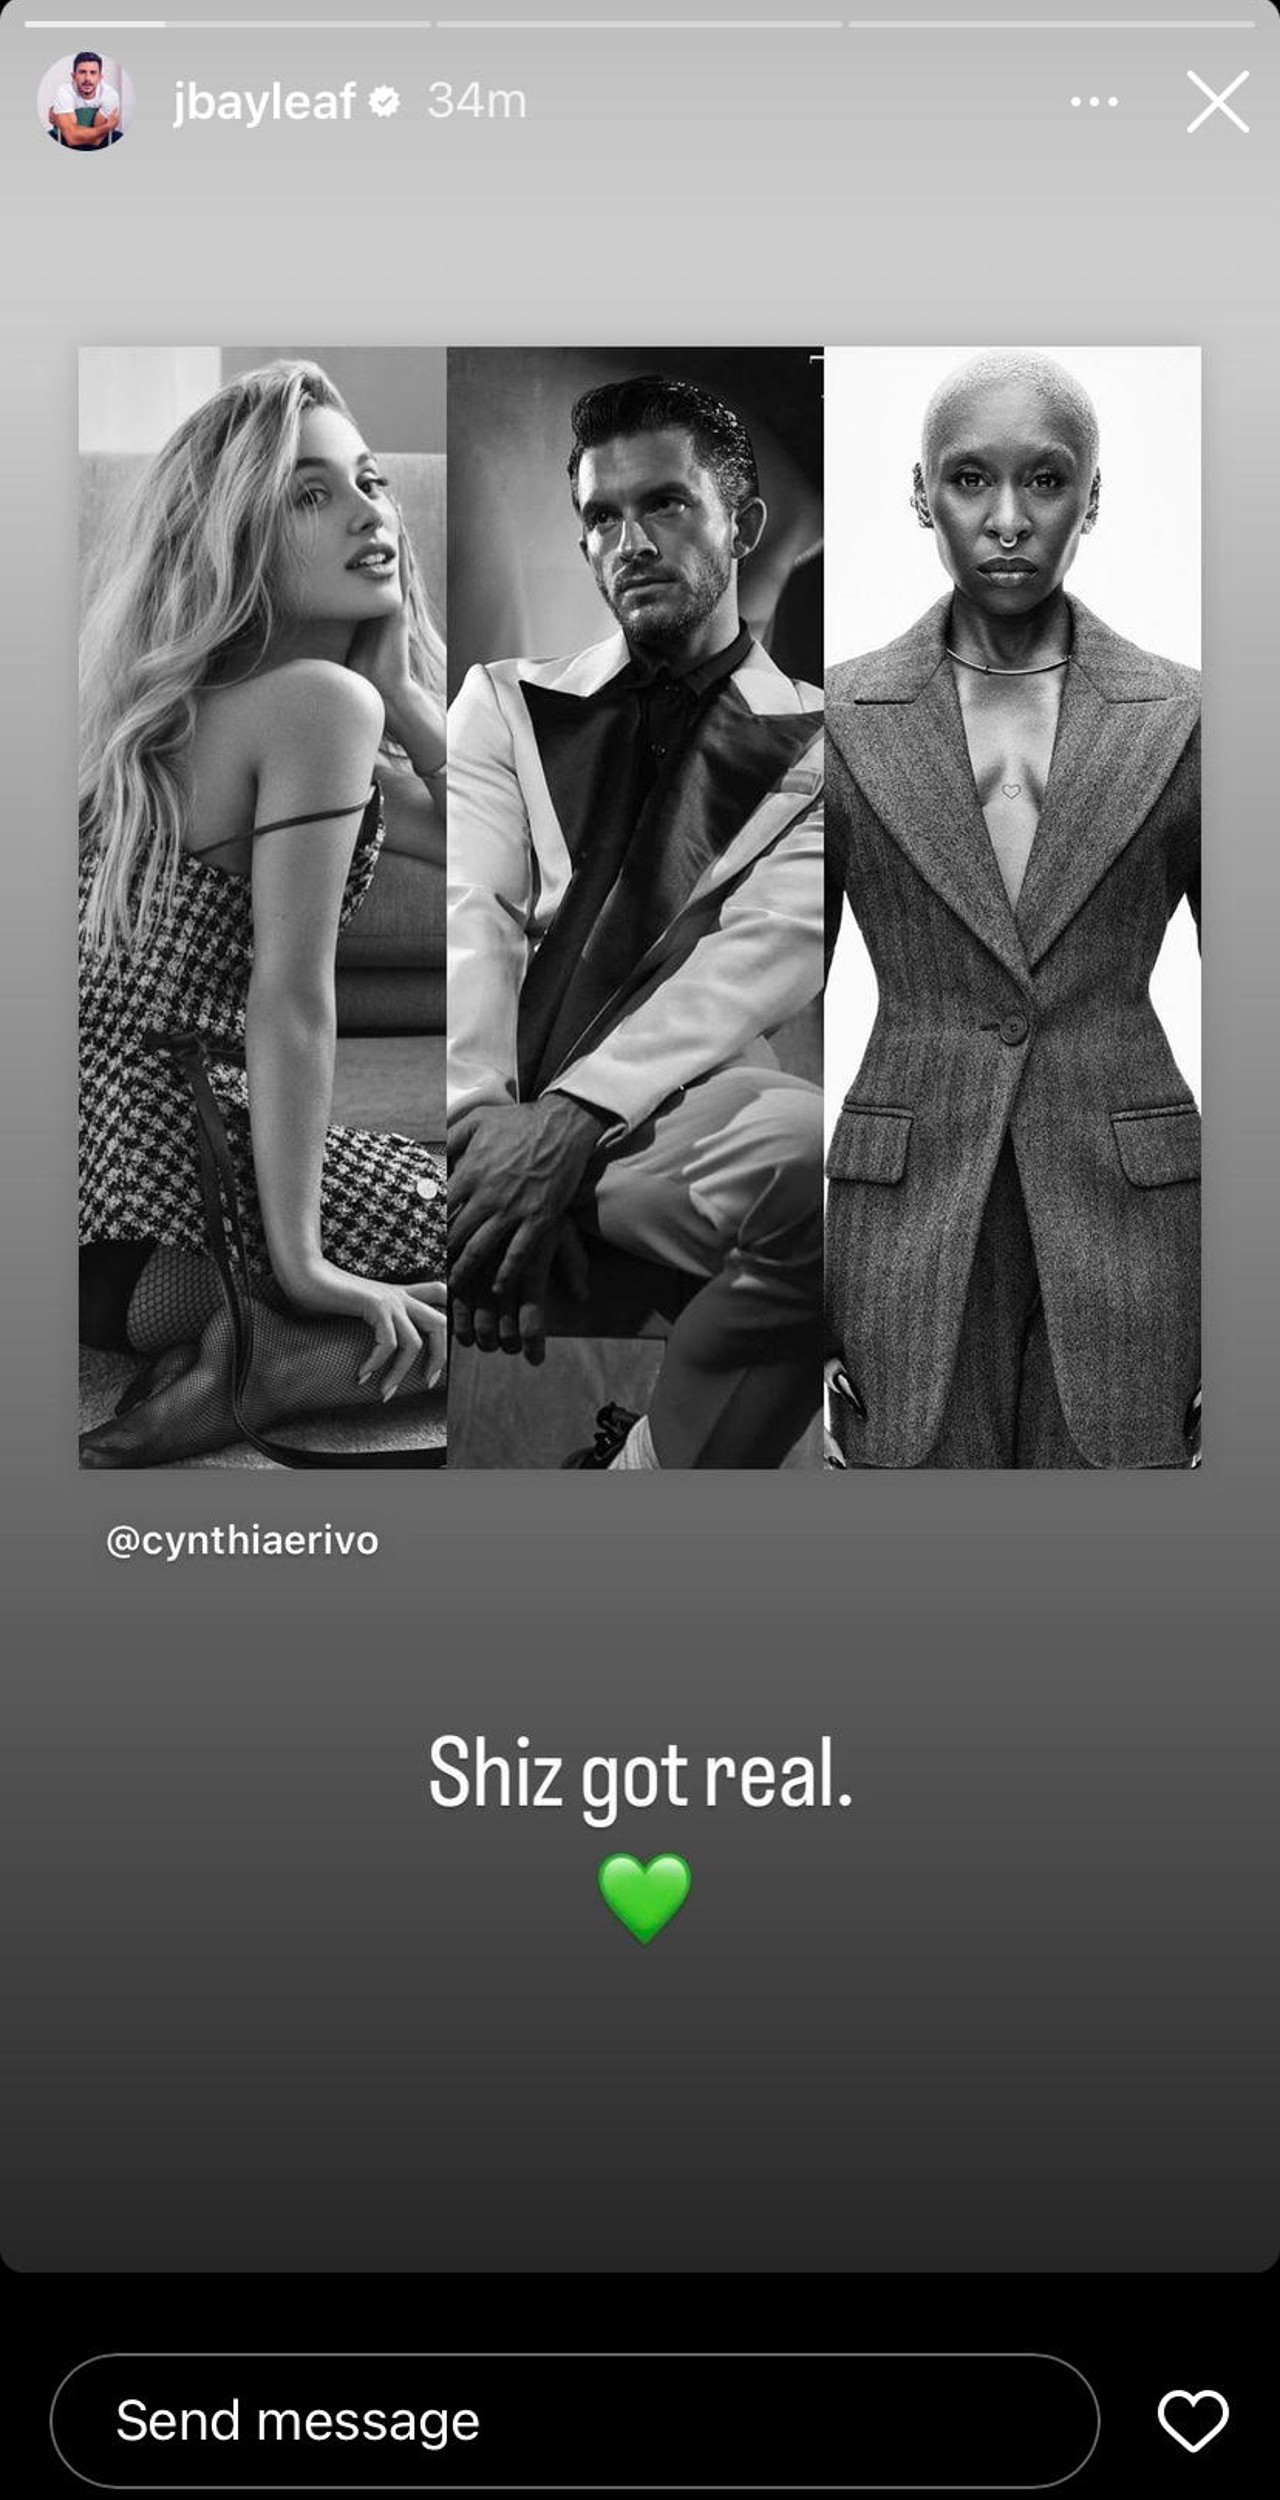 Jonathan Bailey reposted an Instagram post of Cynthia Erivo's post with black and white photos of the two and Ariana Grande.  He commented "Shiz became real." with a green heart emoji.